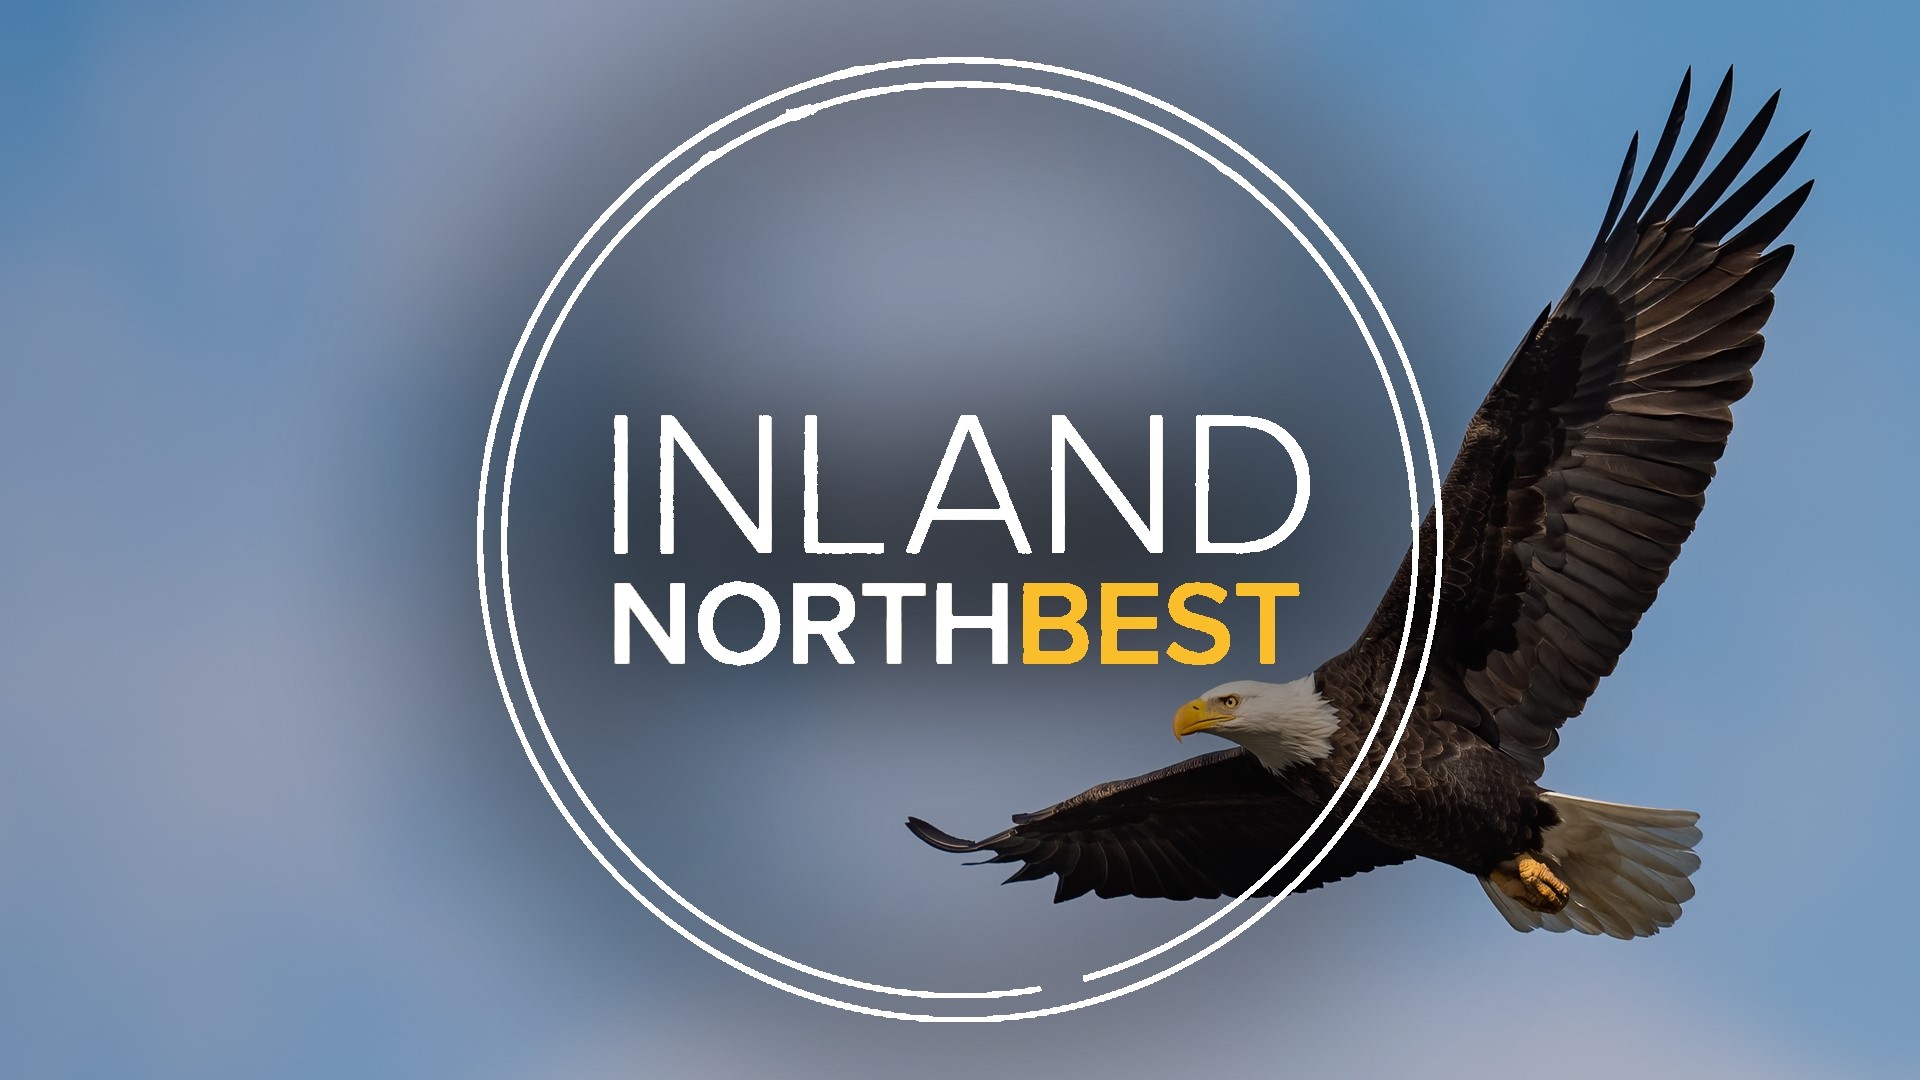 In this Inland NorthBest segment, Dave Somers takes viewers to the magic moment when some of those injured eagles took flight.